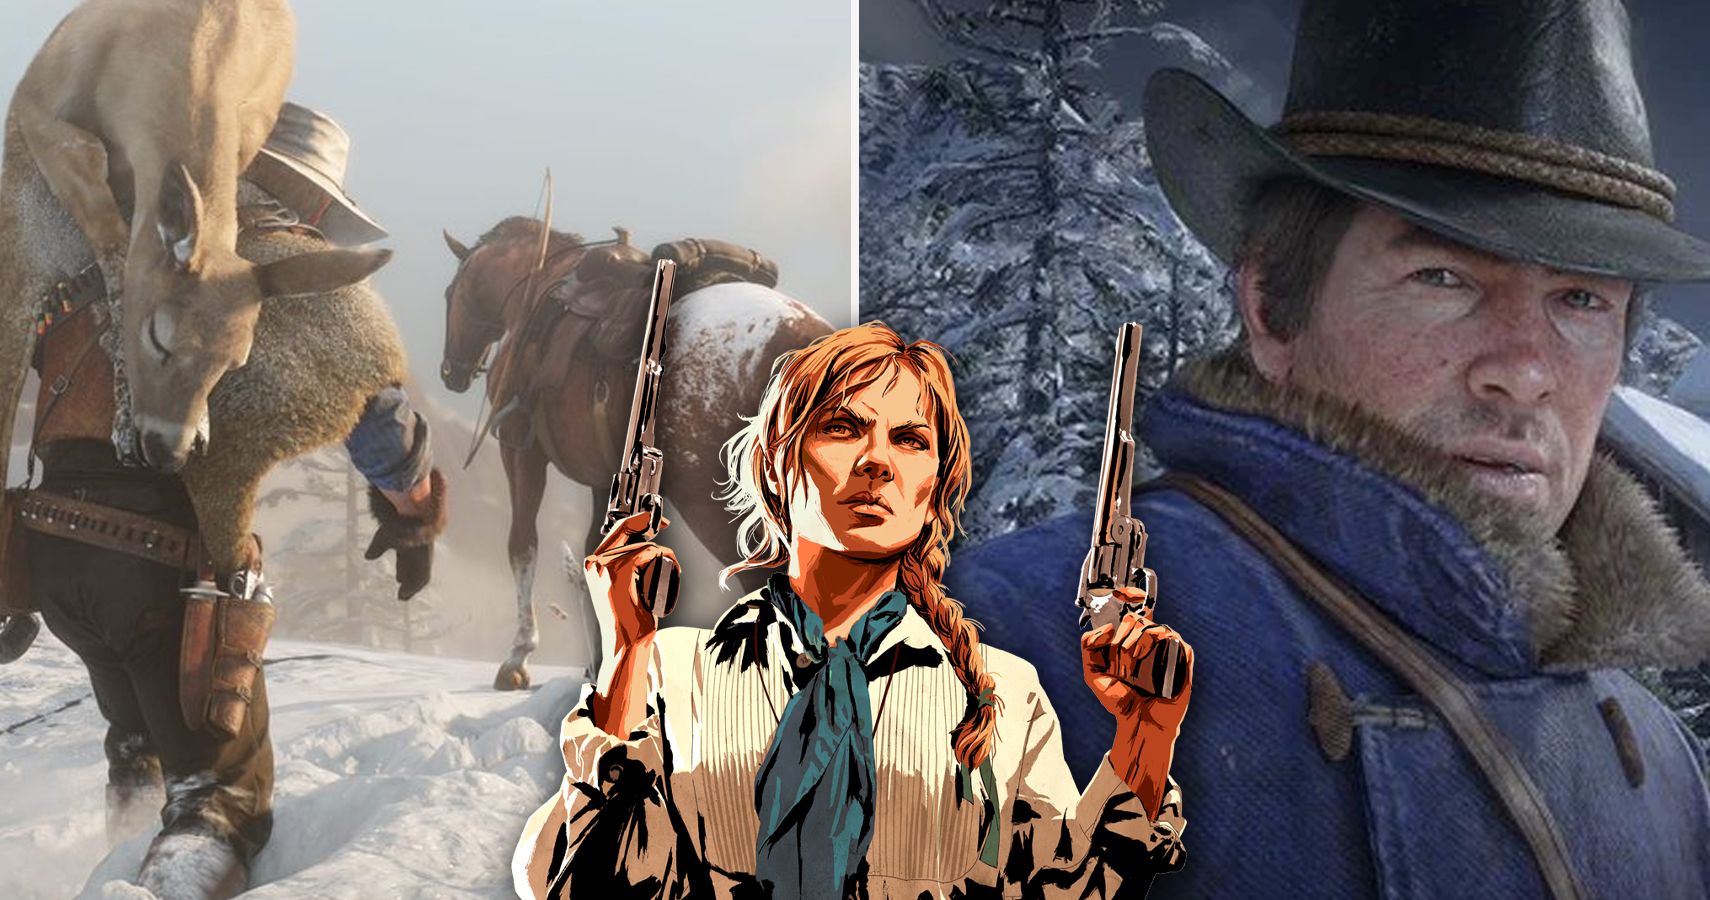 25 Arthur Morgan Quotes From Red Dead Redemption